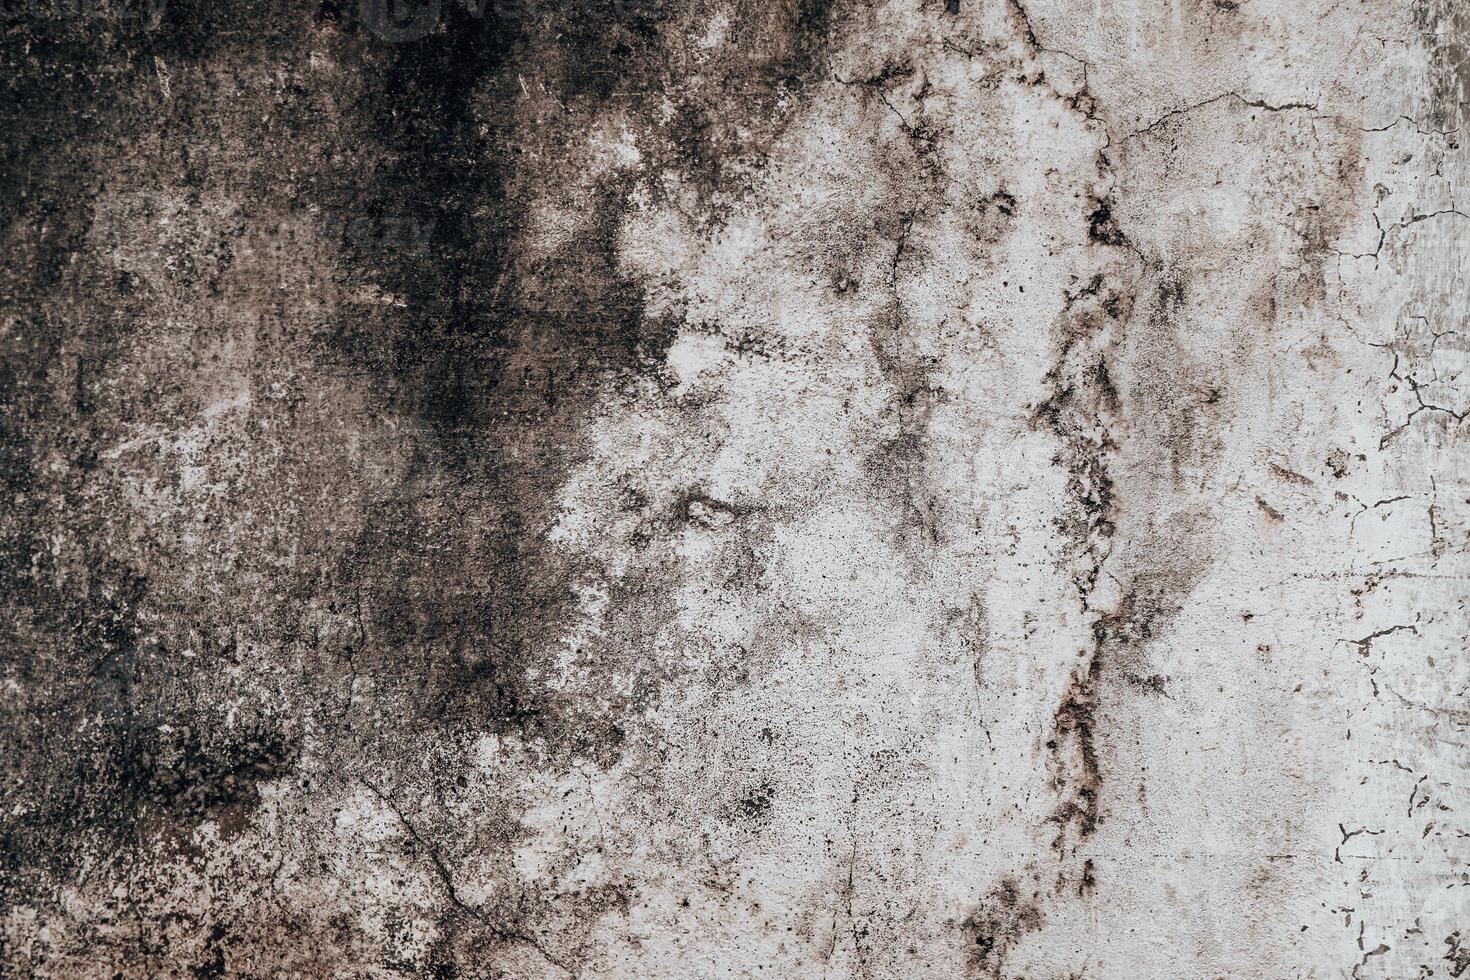 Abstract grunge concrete background for pattern. Grunge old rough cement wall texture. photo